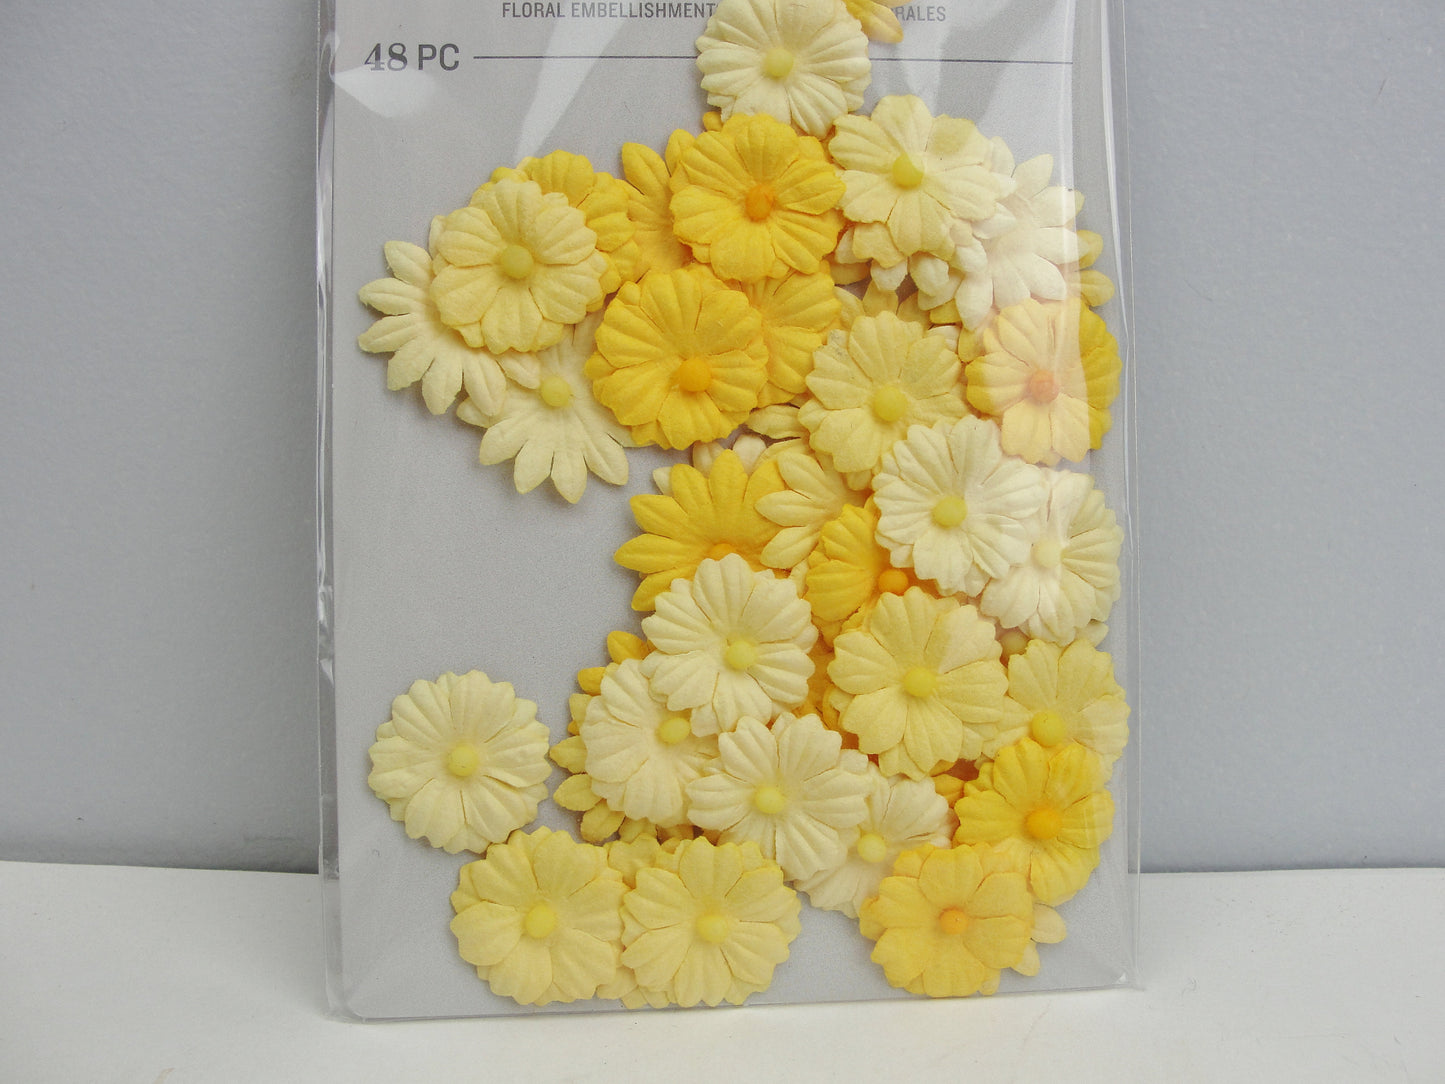 Fabric floral flower embellishments for cards or mixed media art